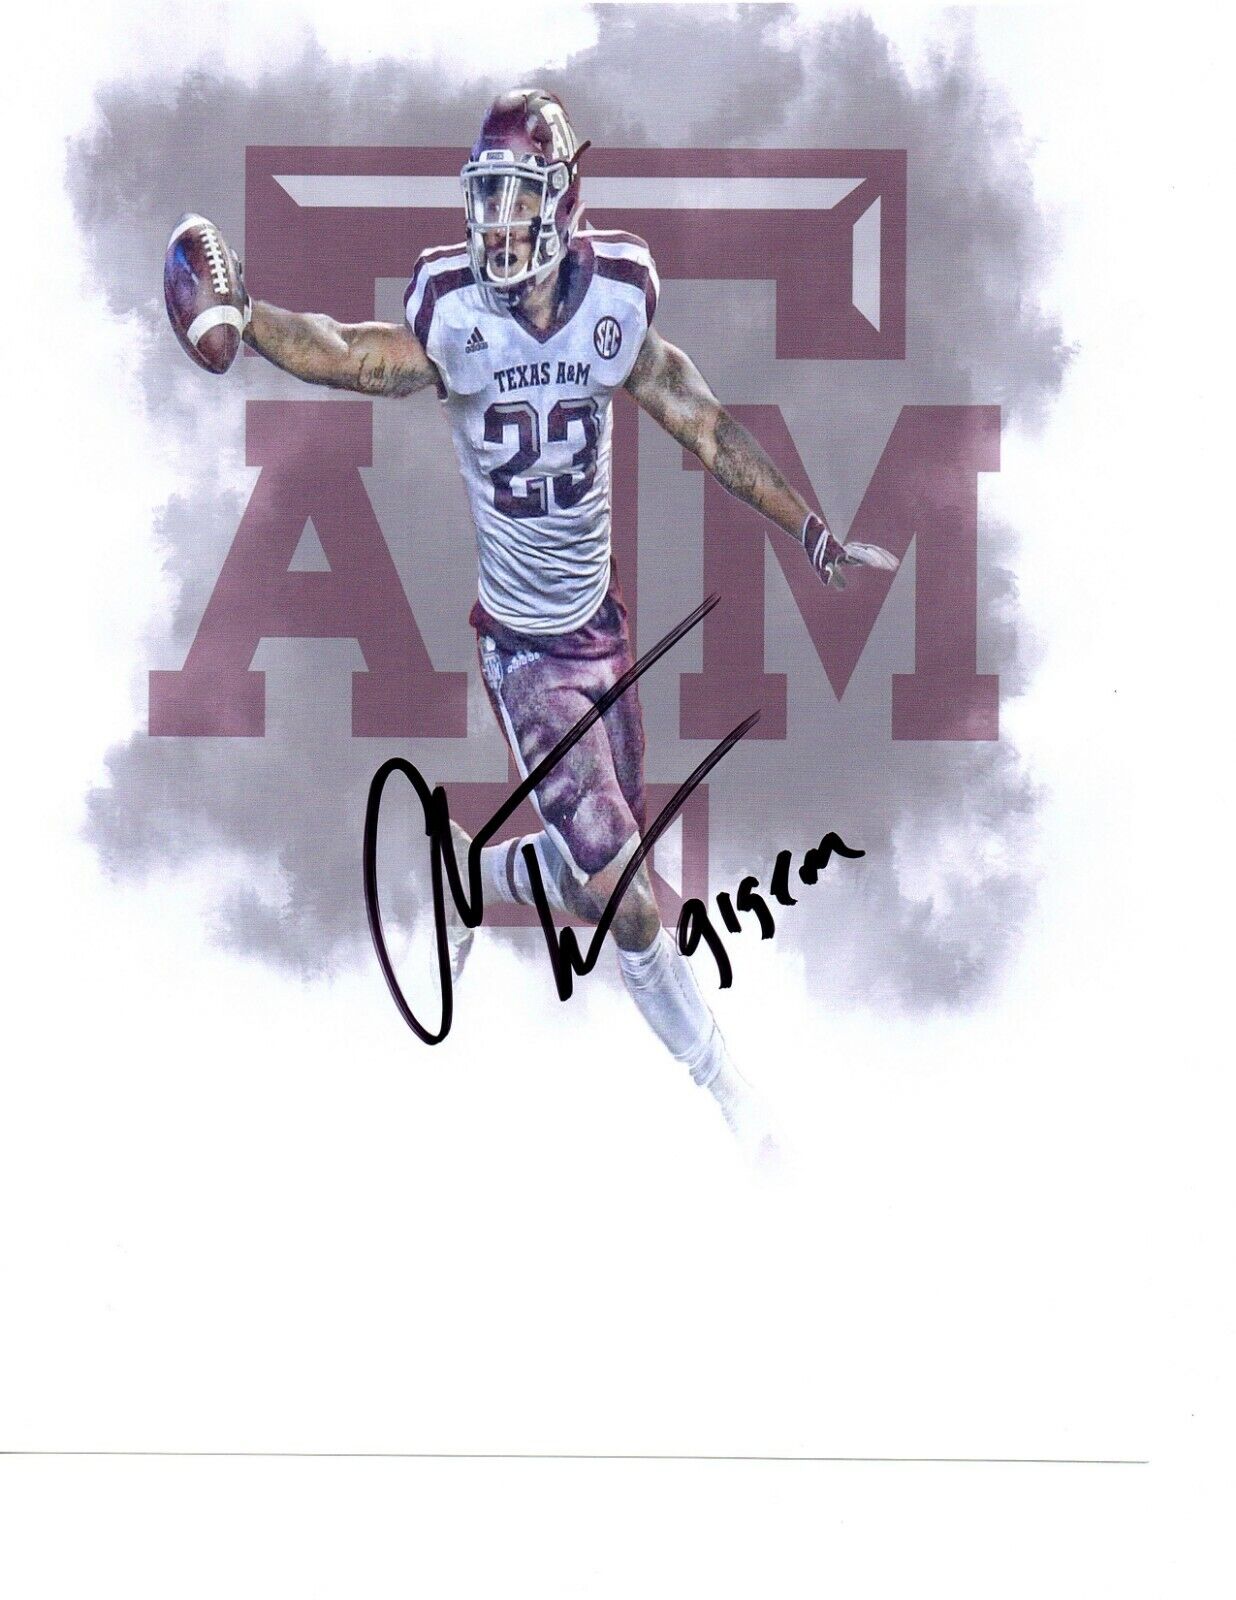 Armani Watts Texas A&M Aggies signed autographed 8x10 football Photo Poster painting edit!